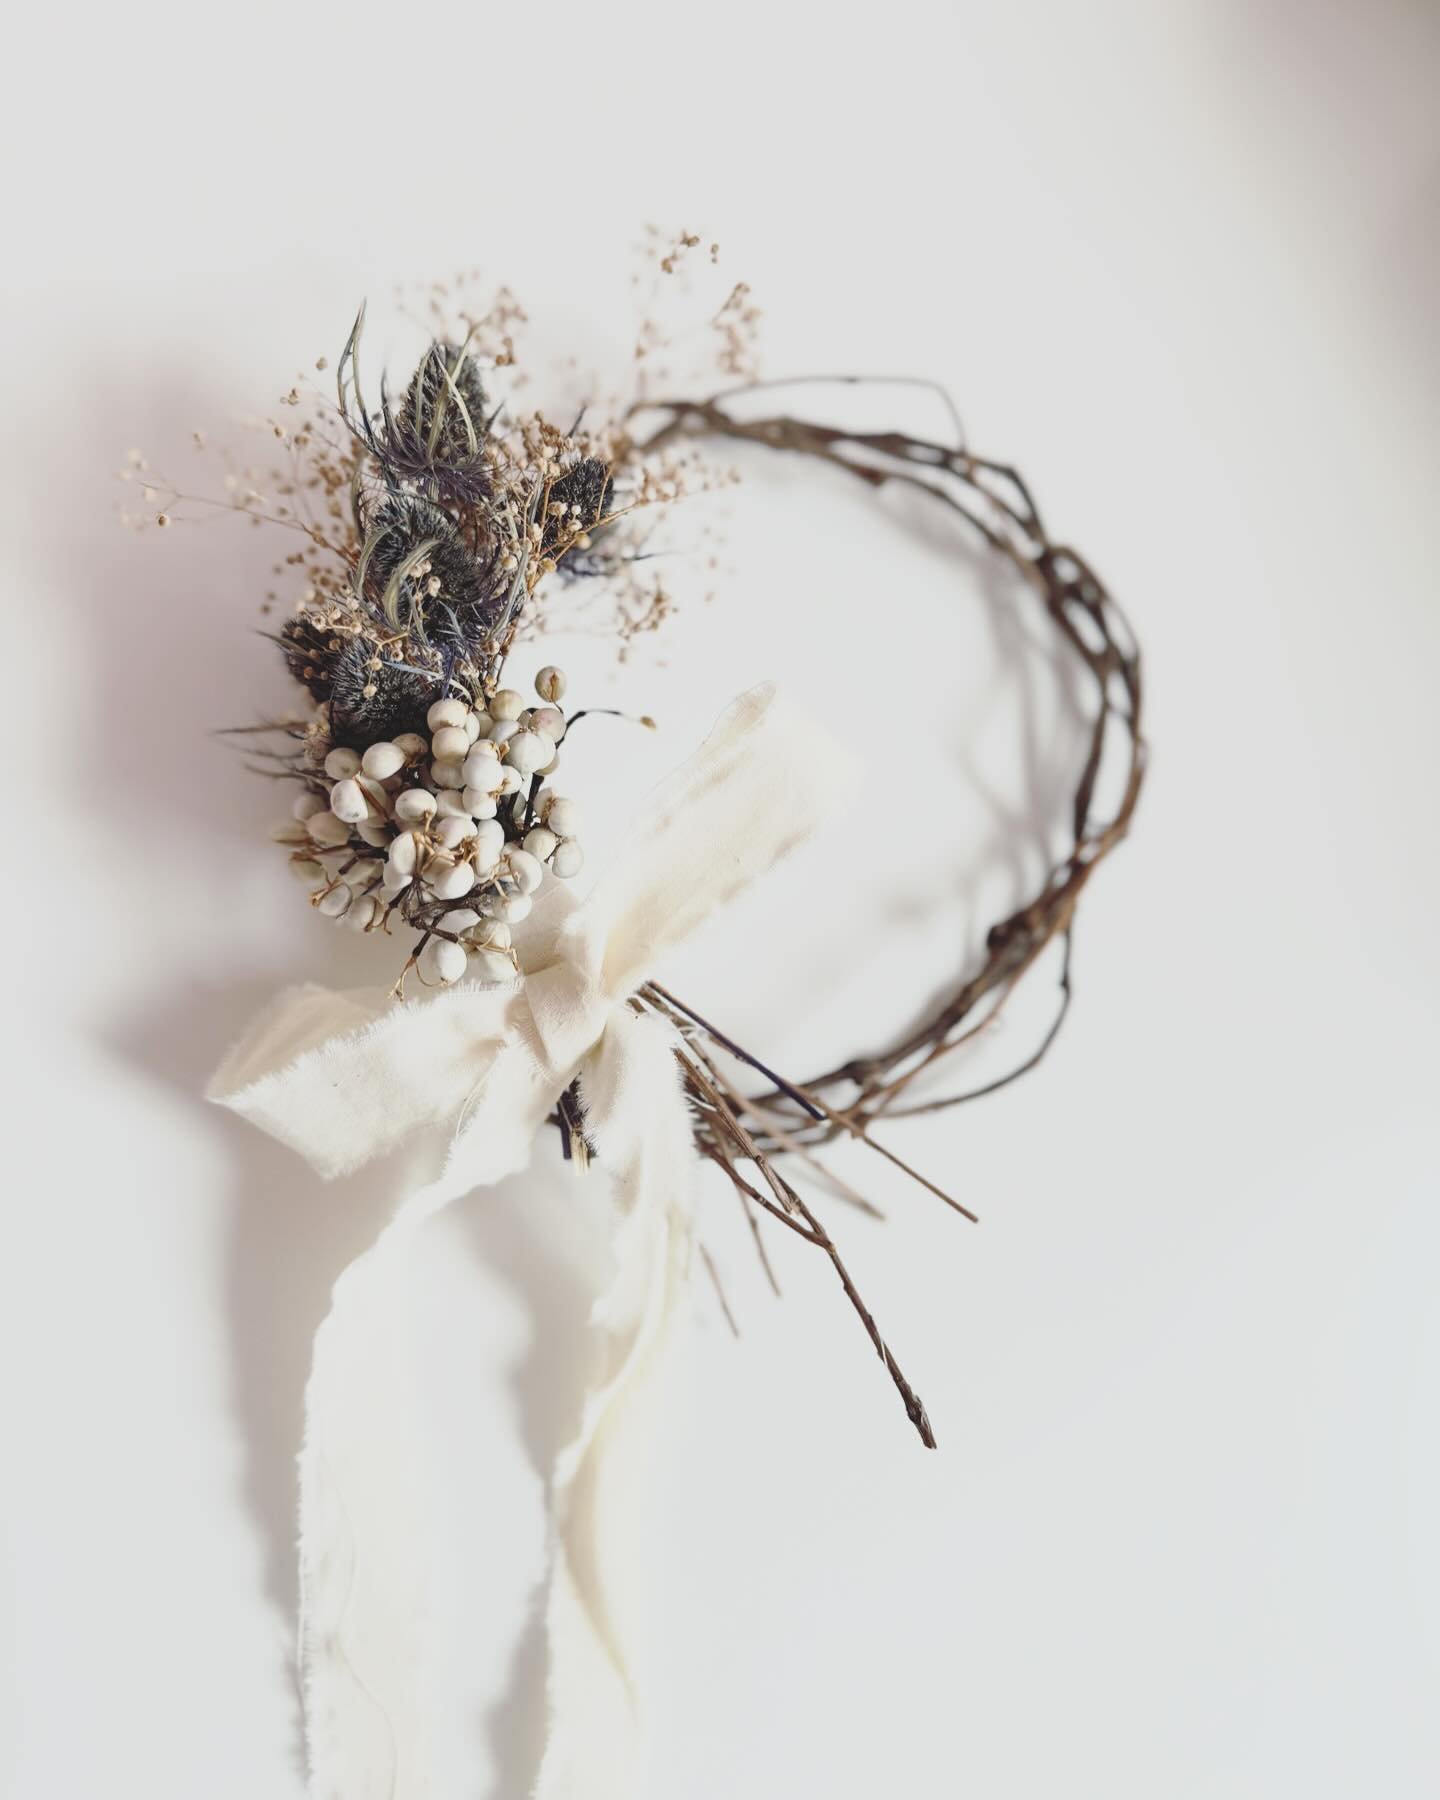 Simple small dried flower wreath🤍💙The blue thistle flowers were dried naturally at our studio. I love the white berries, too. DM me if you are interested! ドライフラワーリース。青い実みたいなお花はうちで乾かしました。この白いかわいい実も大好き。#wreath #miniwreath #driedflowers #driedflowerwr